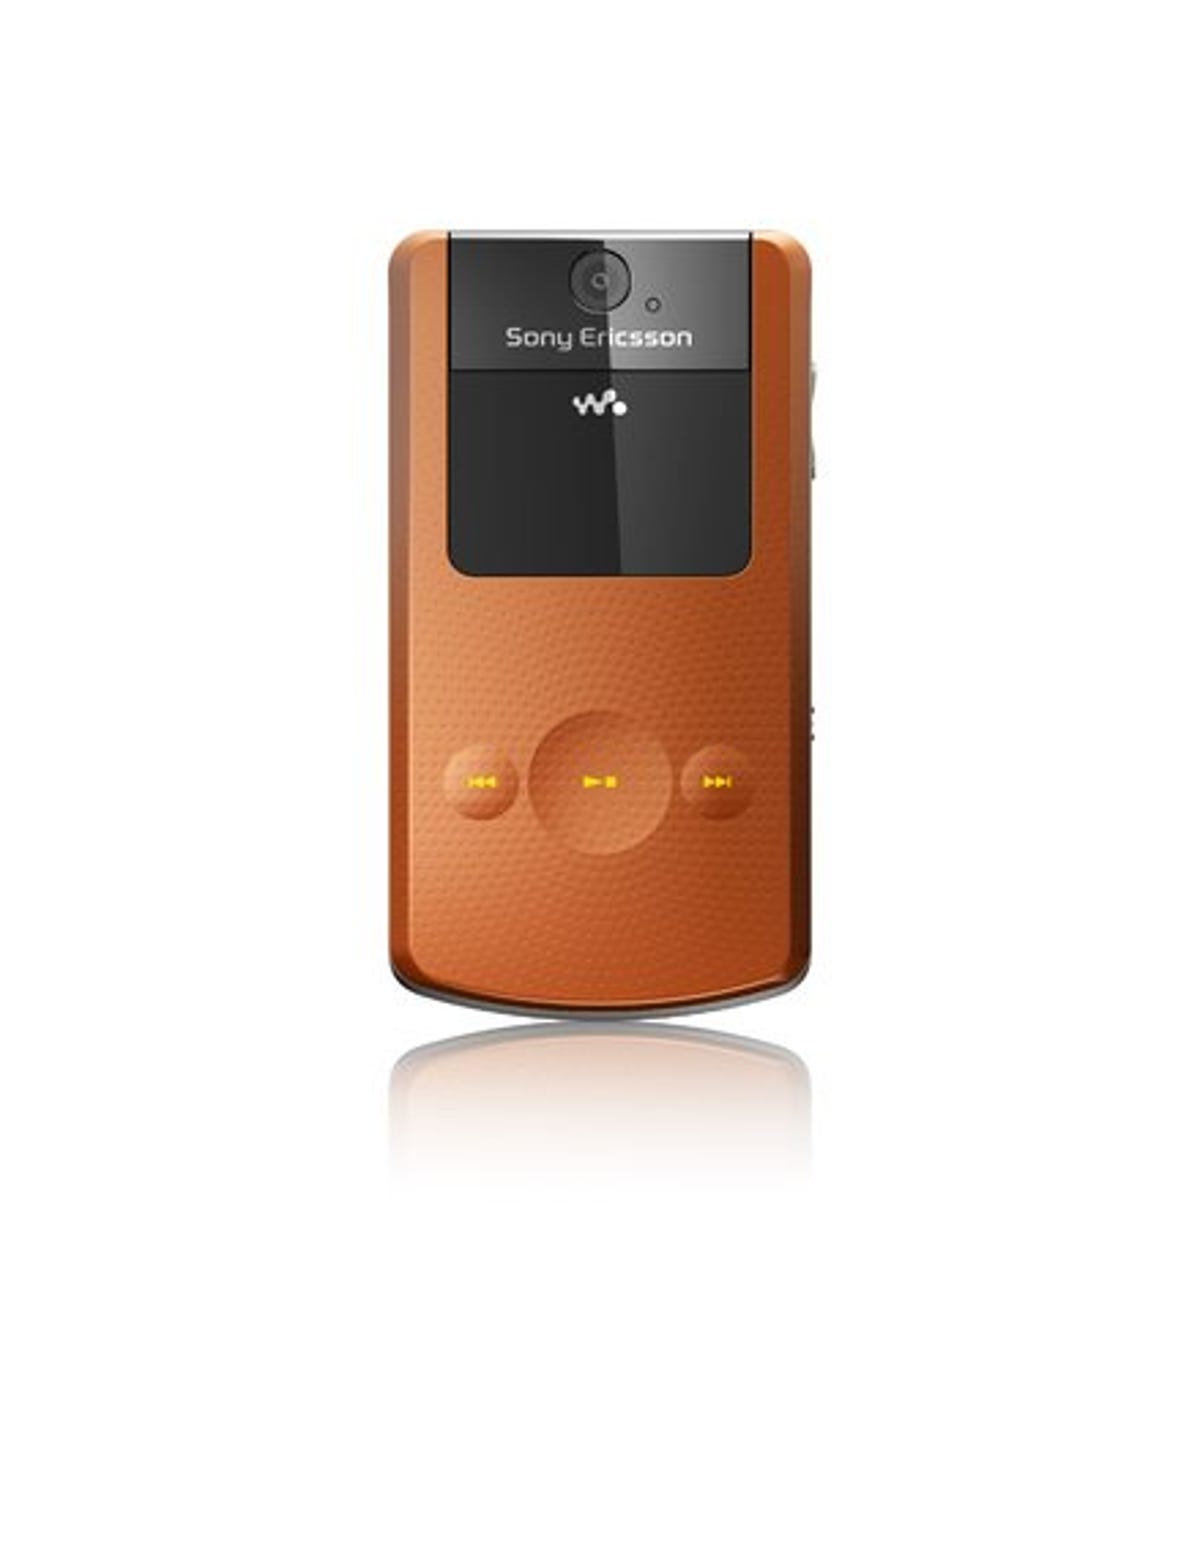 w508_front_closed_metal_grey_with_sunny_orange_cover.jpg